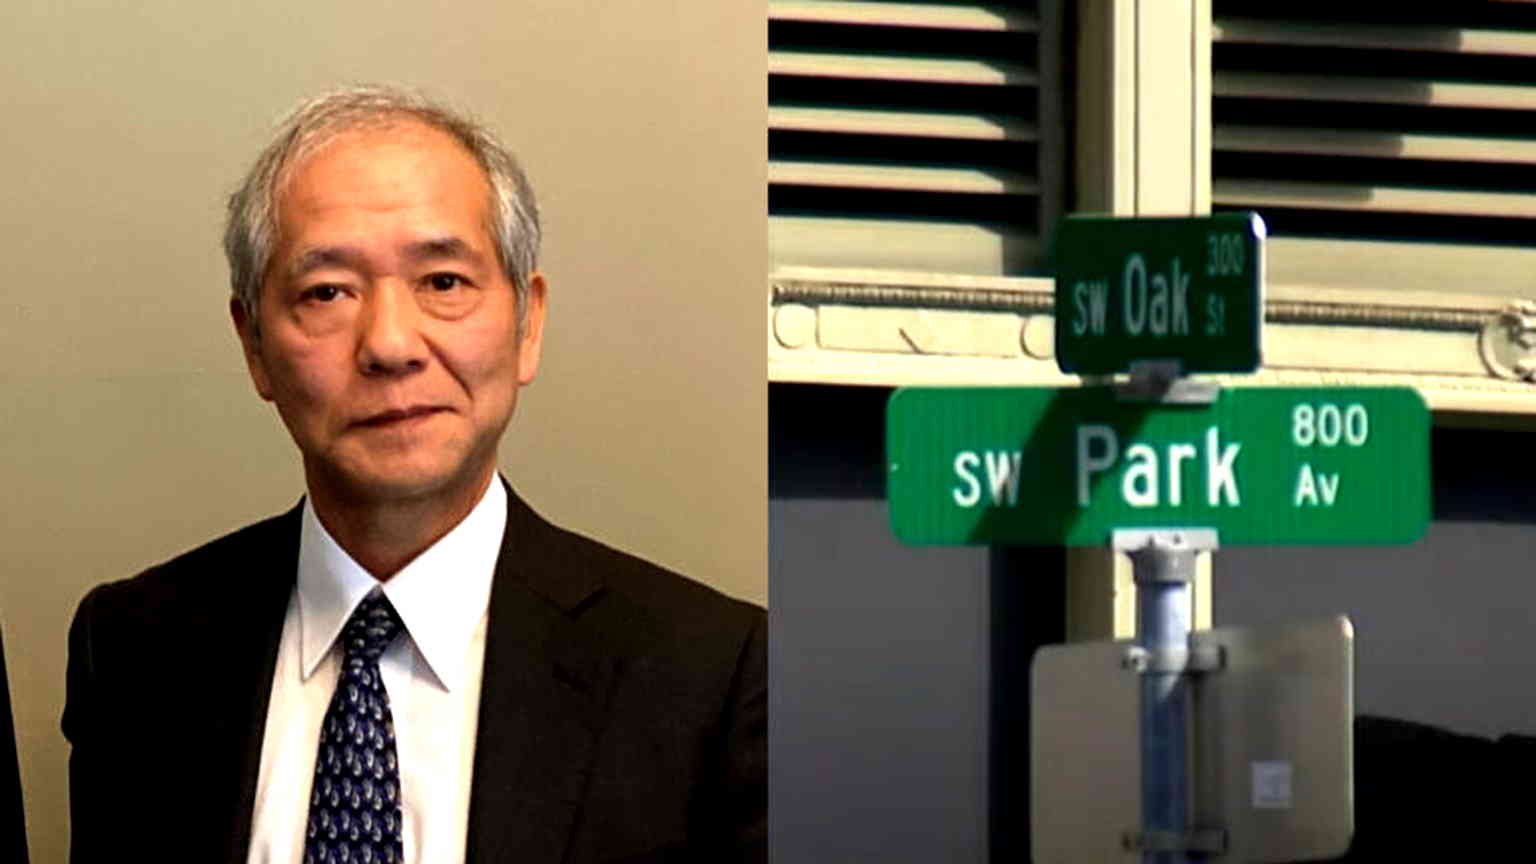 Serial anti-Asian attacker who shoved Japanese diplomat in Portland hit with federal charge